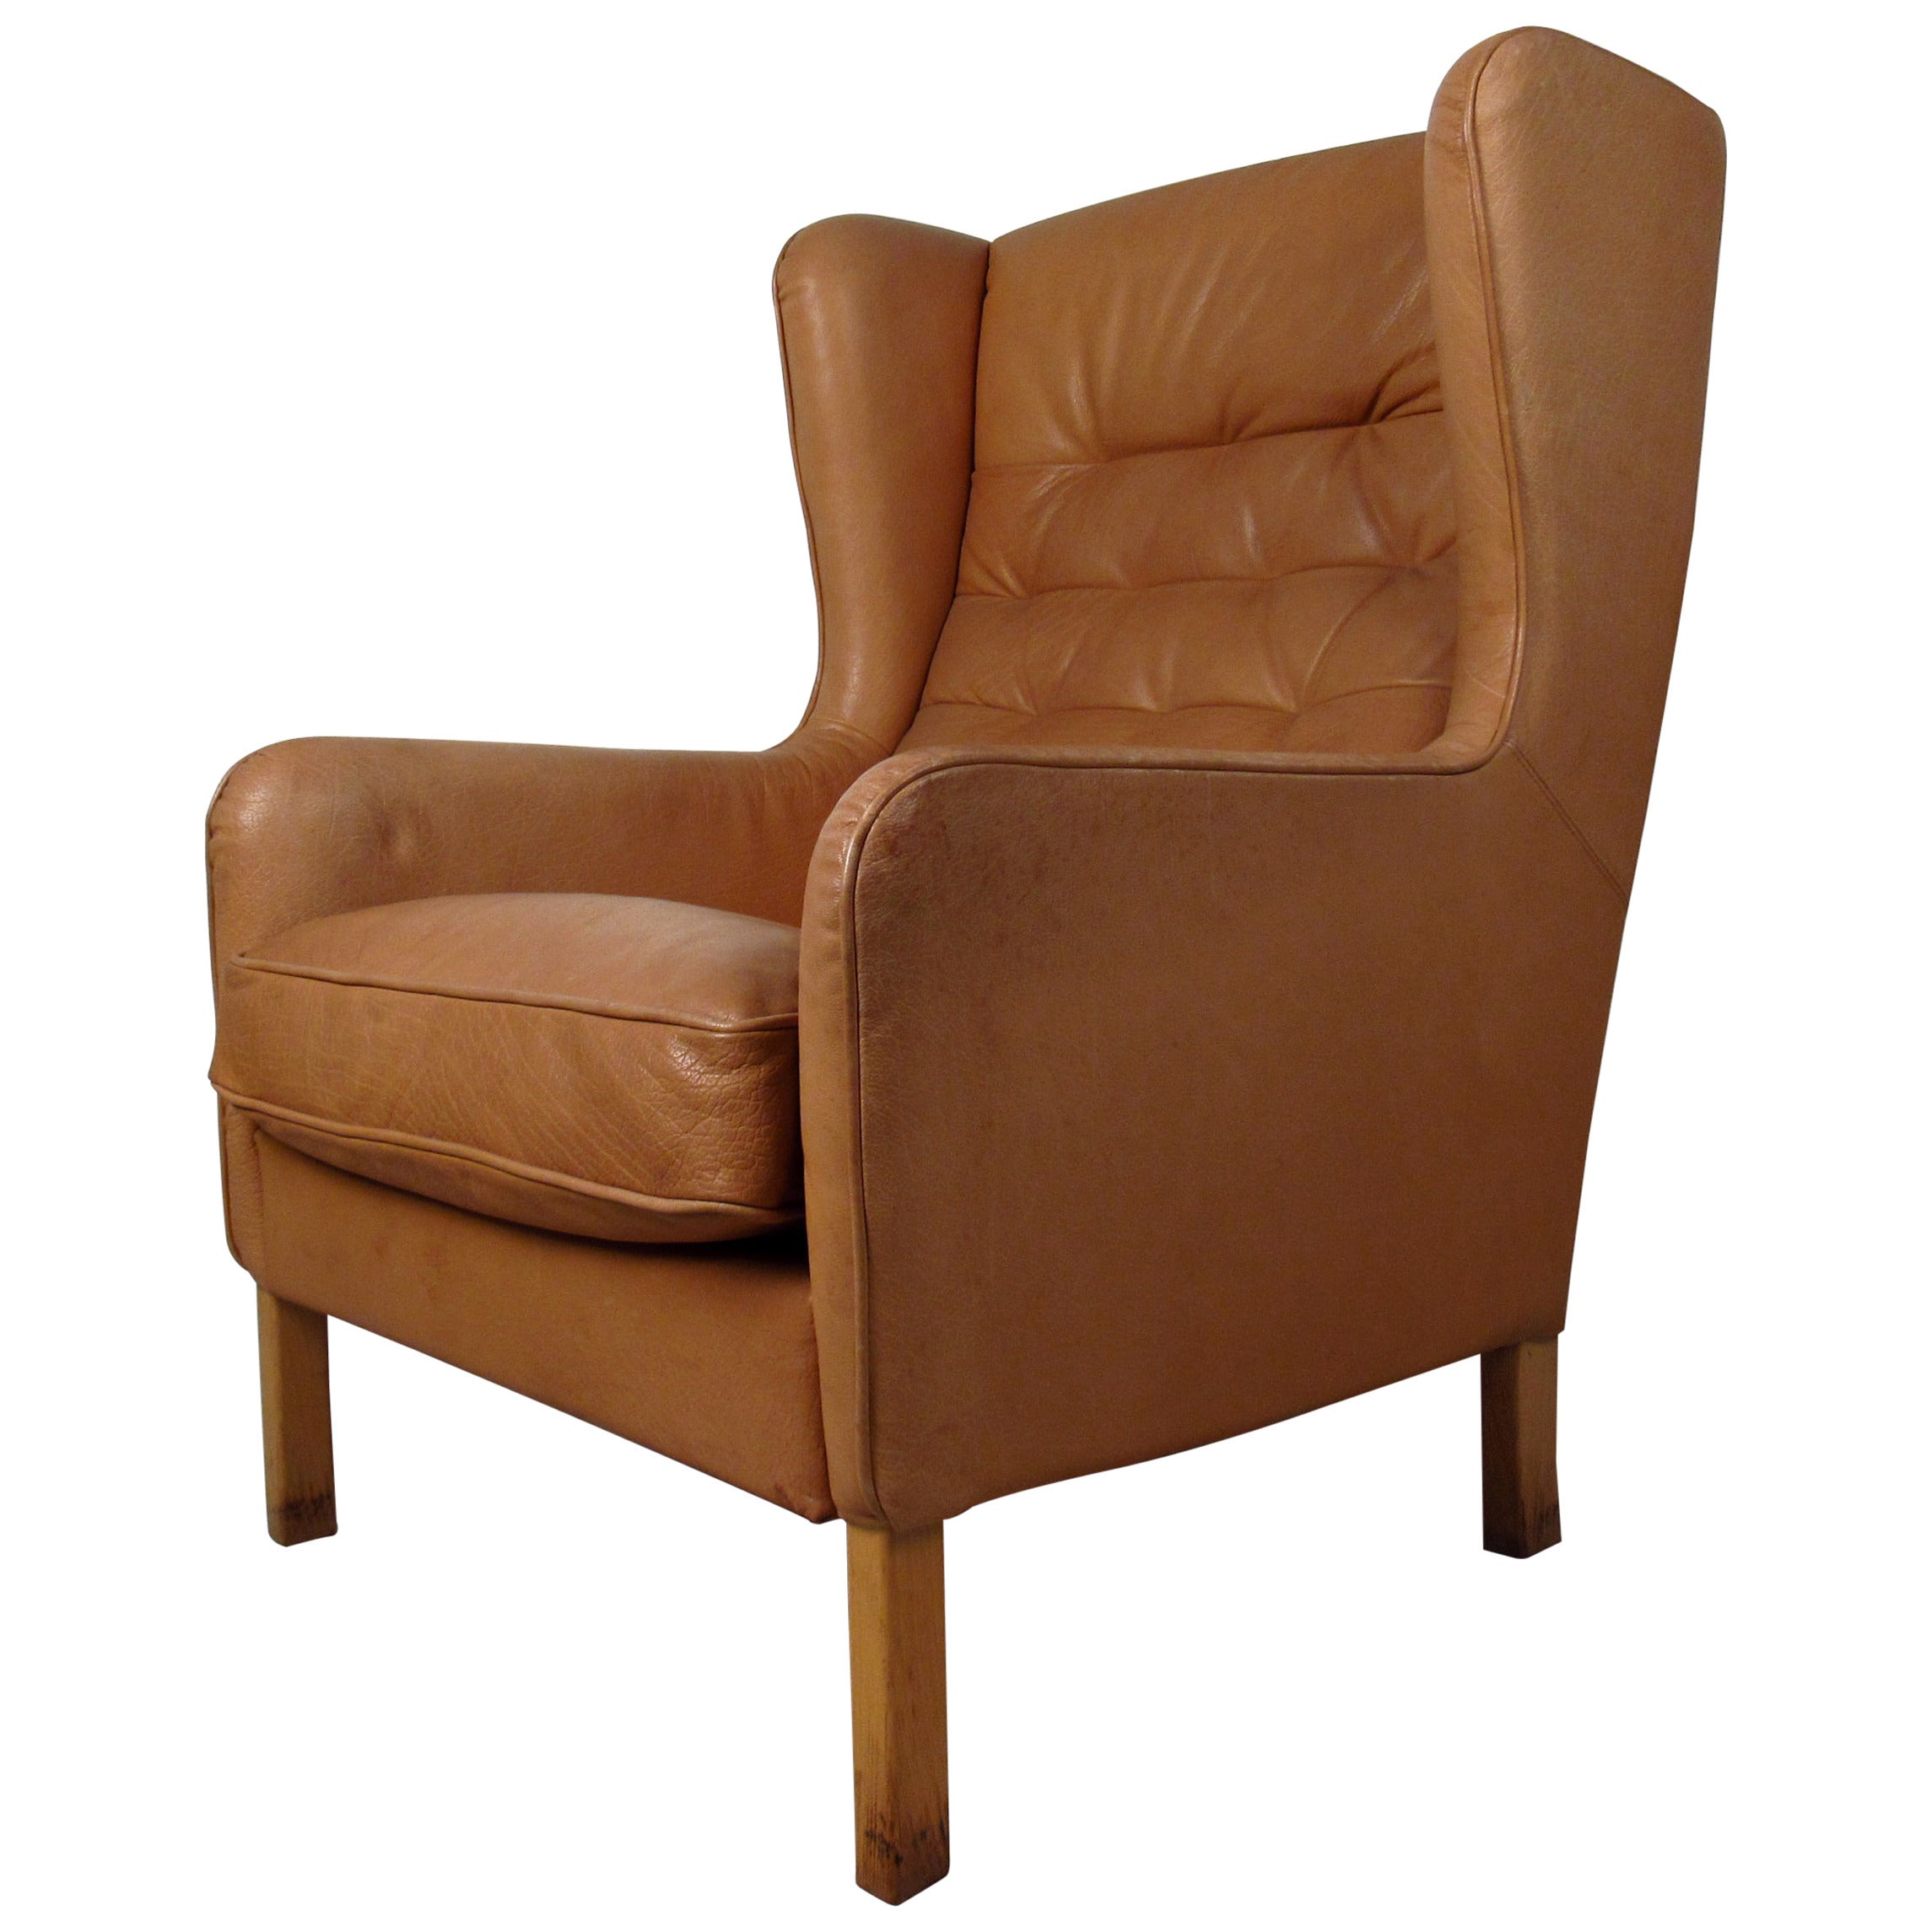 Mid-Century Modern Tufted Leather Wingback Lounge Chair